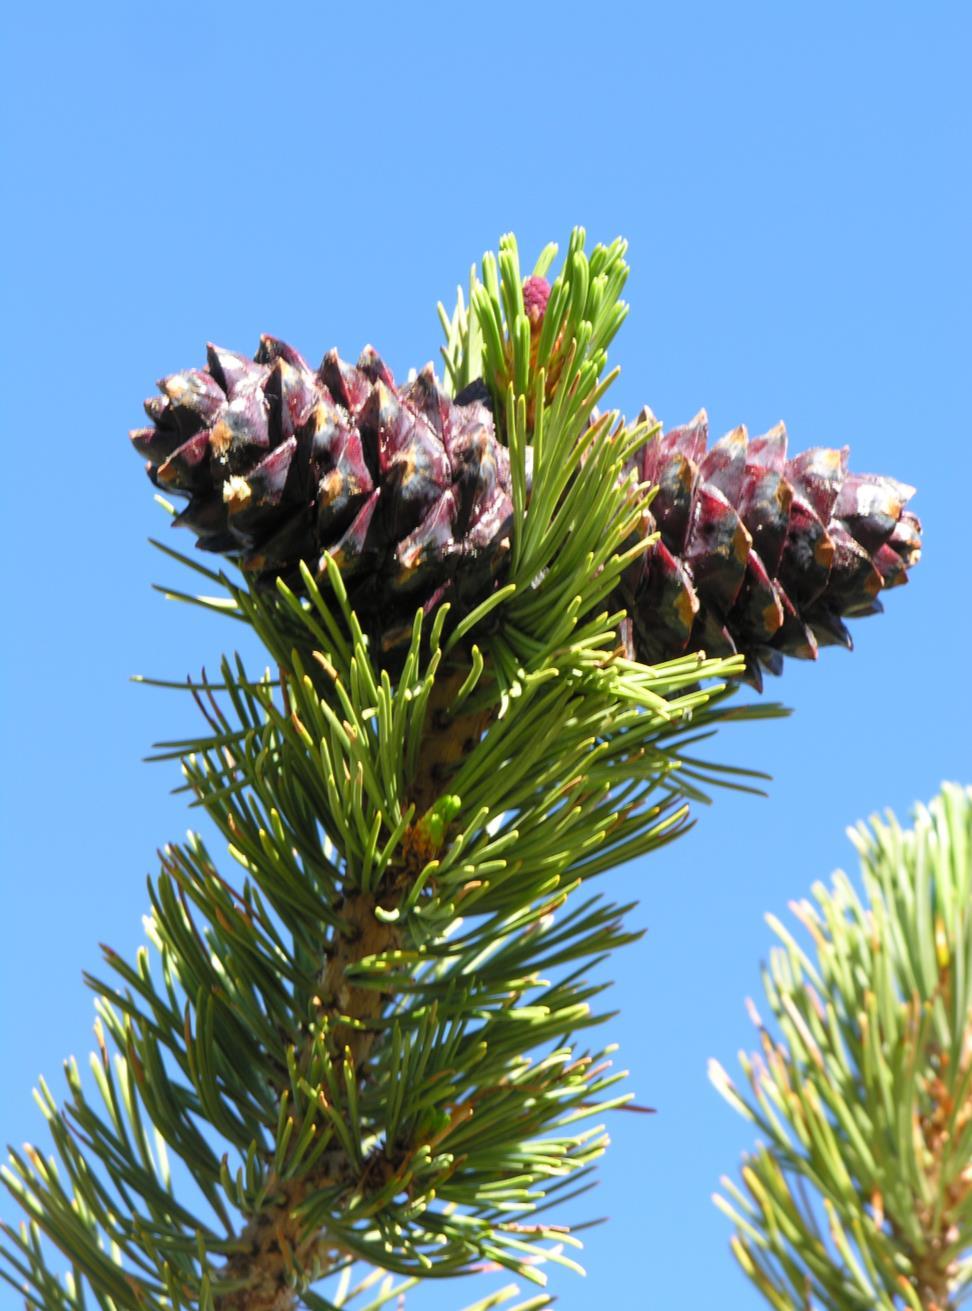 Topics The nature of disease resistance in pines: An array of behavioral traits Mechanisms of resistance to white pine blister rust in the California